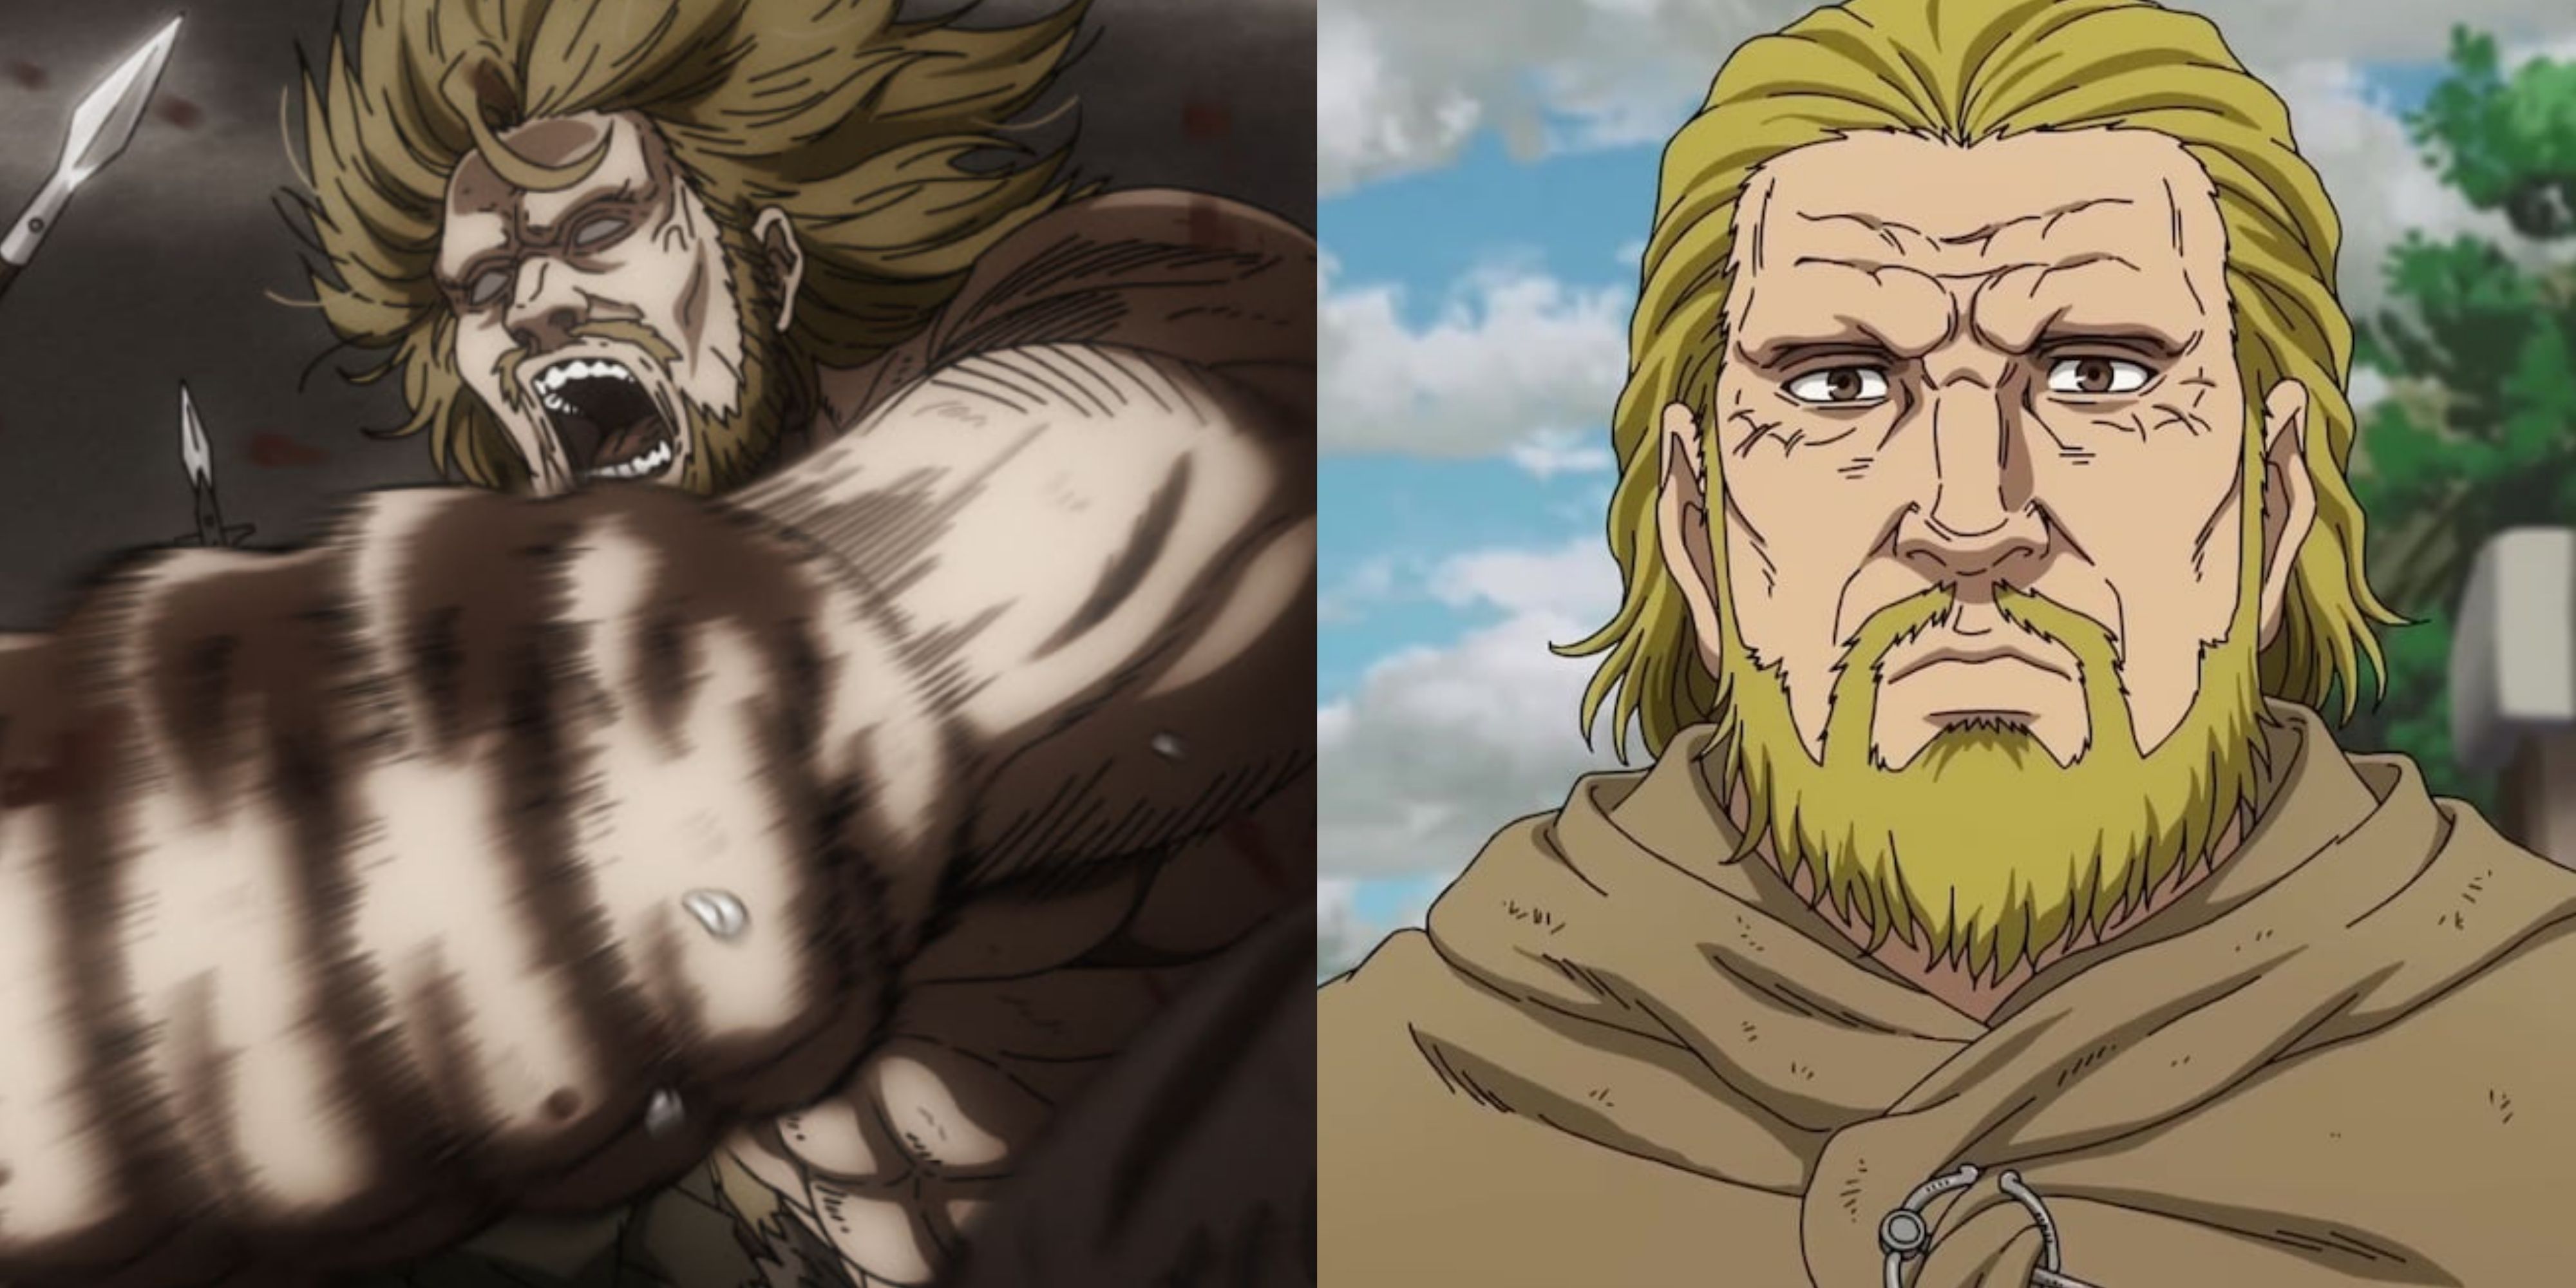 Vinland Saga Season 2's second cour brings new songs and epic